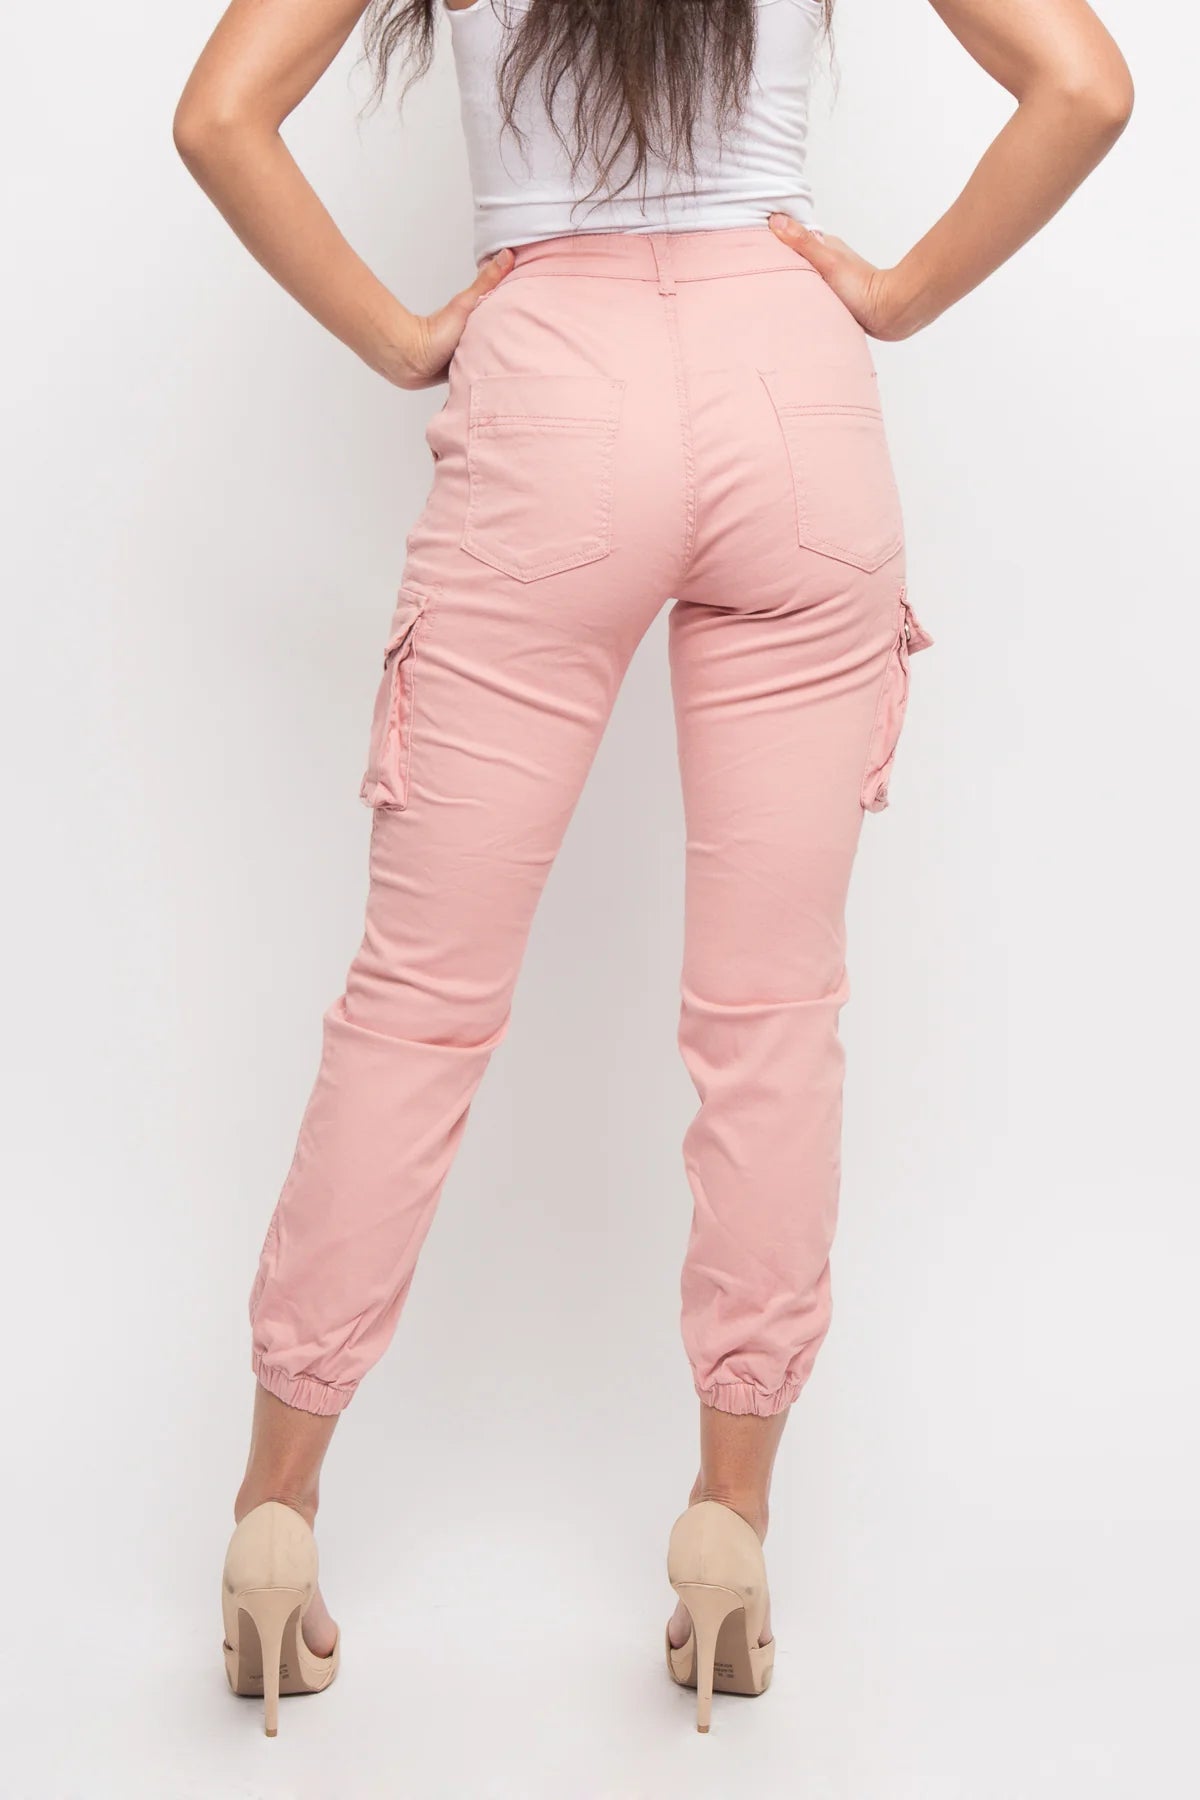 Women's Essential Basic Cropped Colored Cargo Joggers - Pink